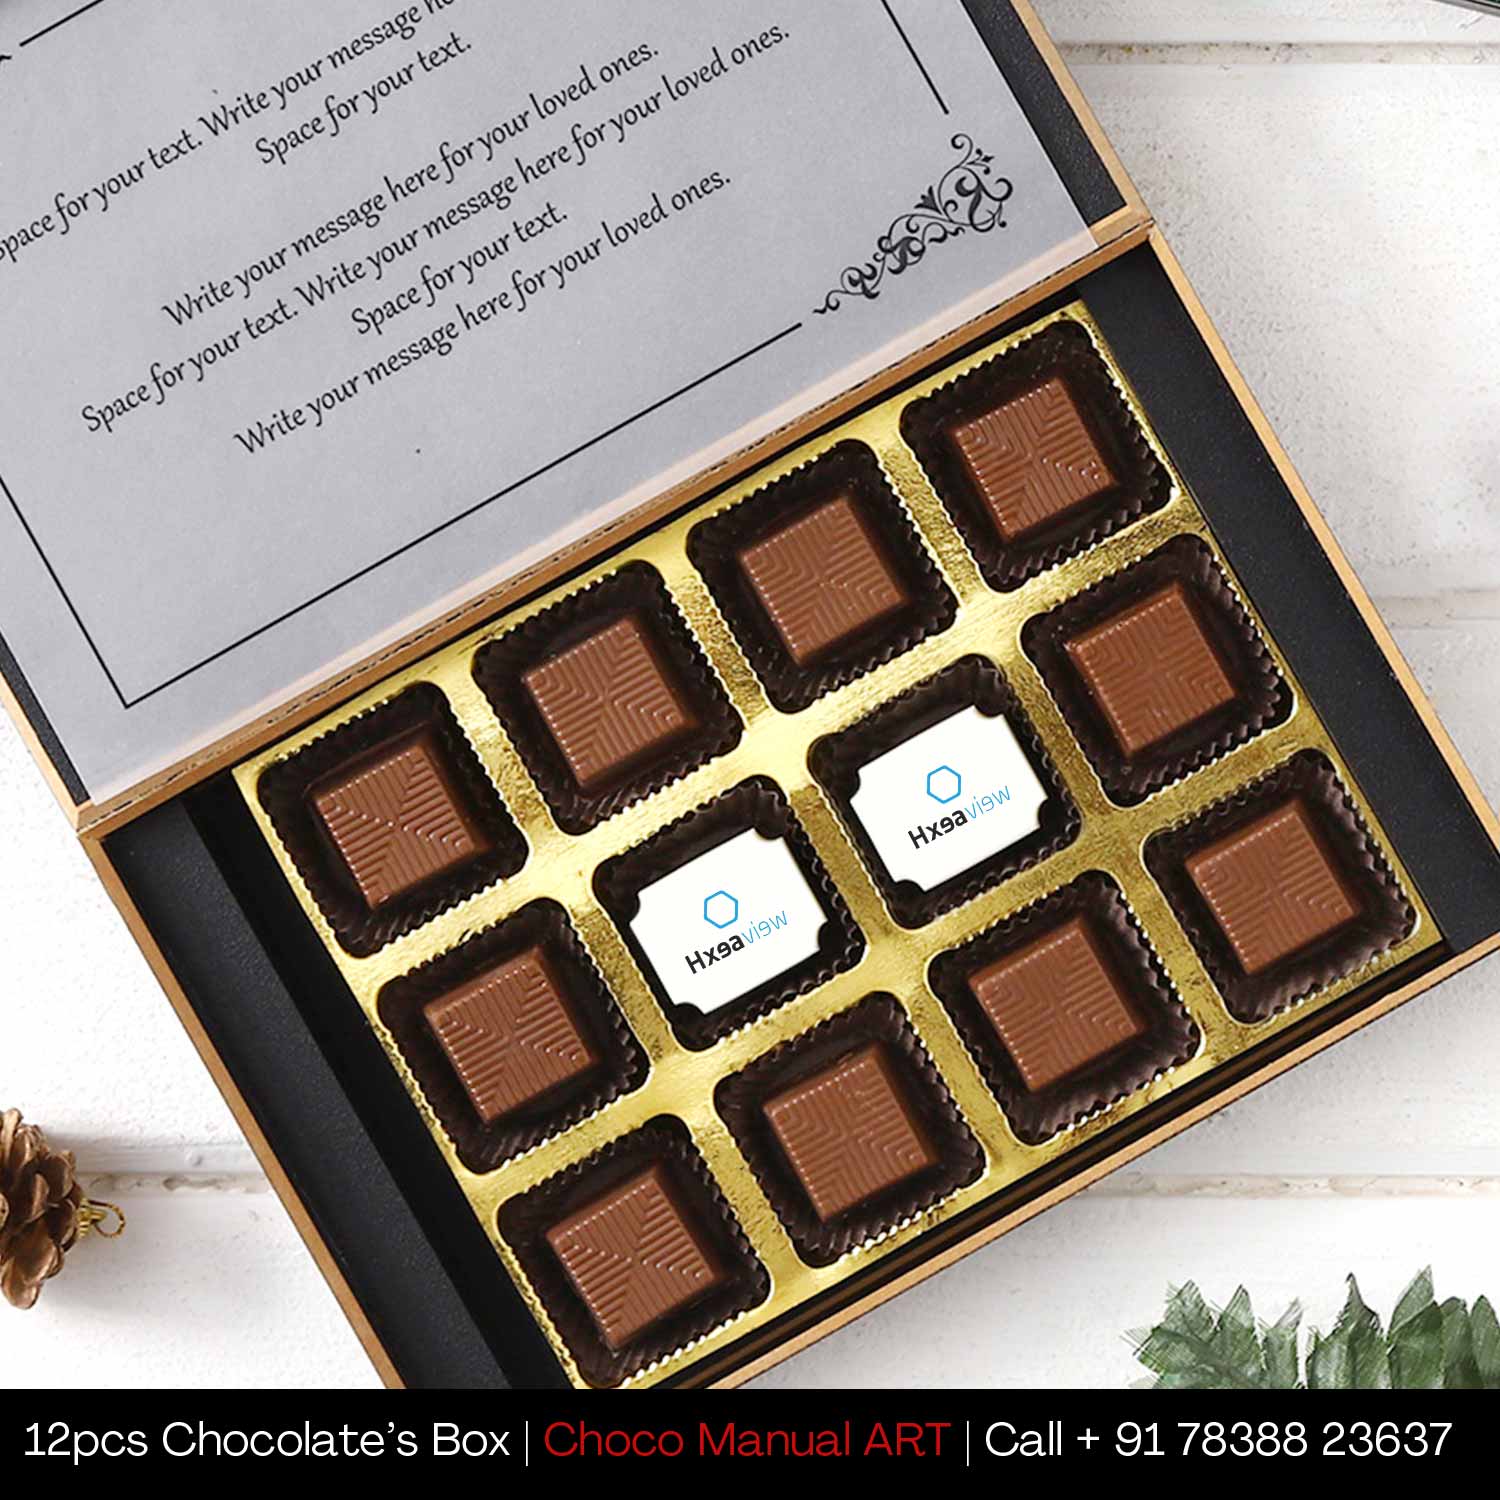 Buy/ Send Corporate Chocolate Gift Ideas for Employees & Clients